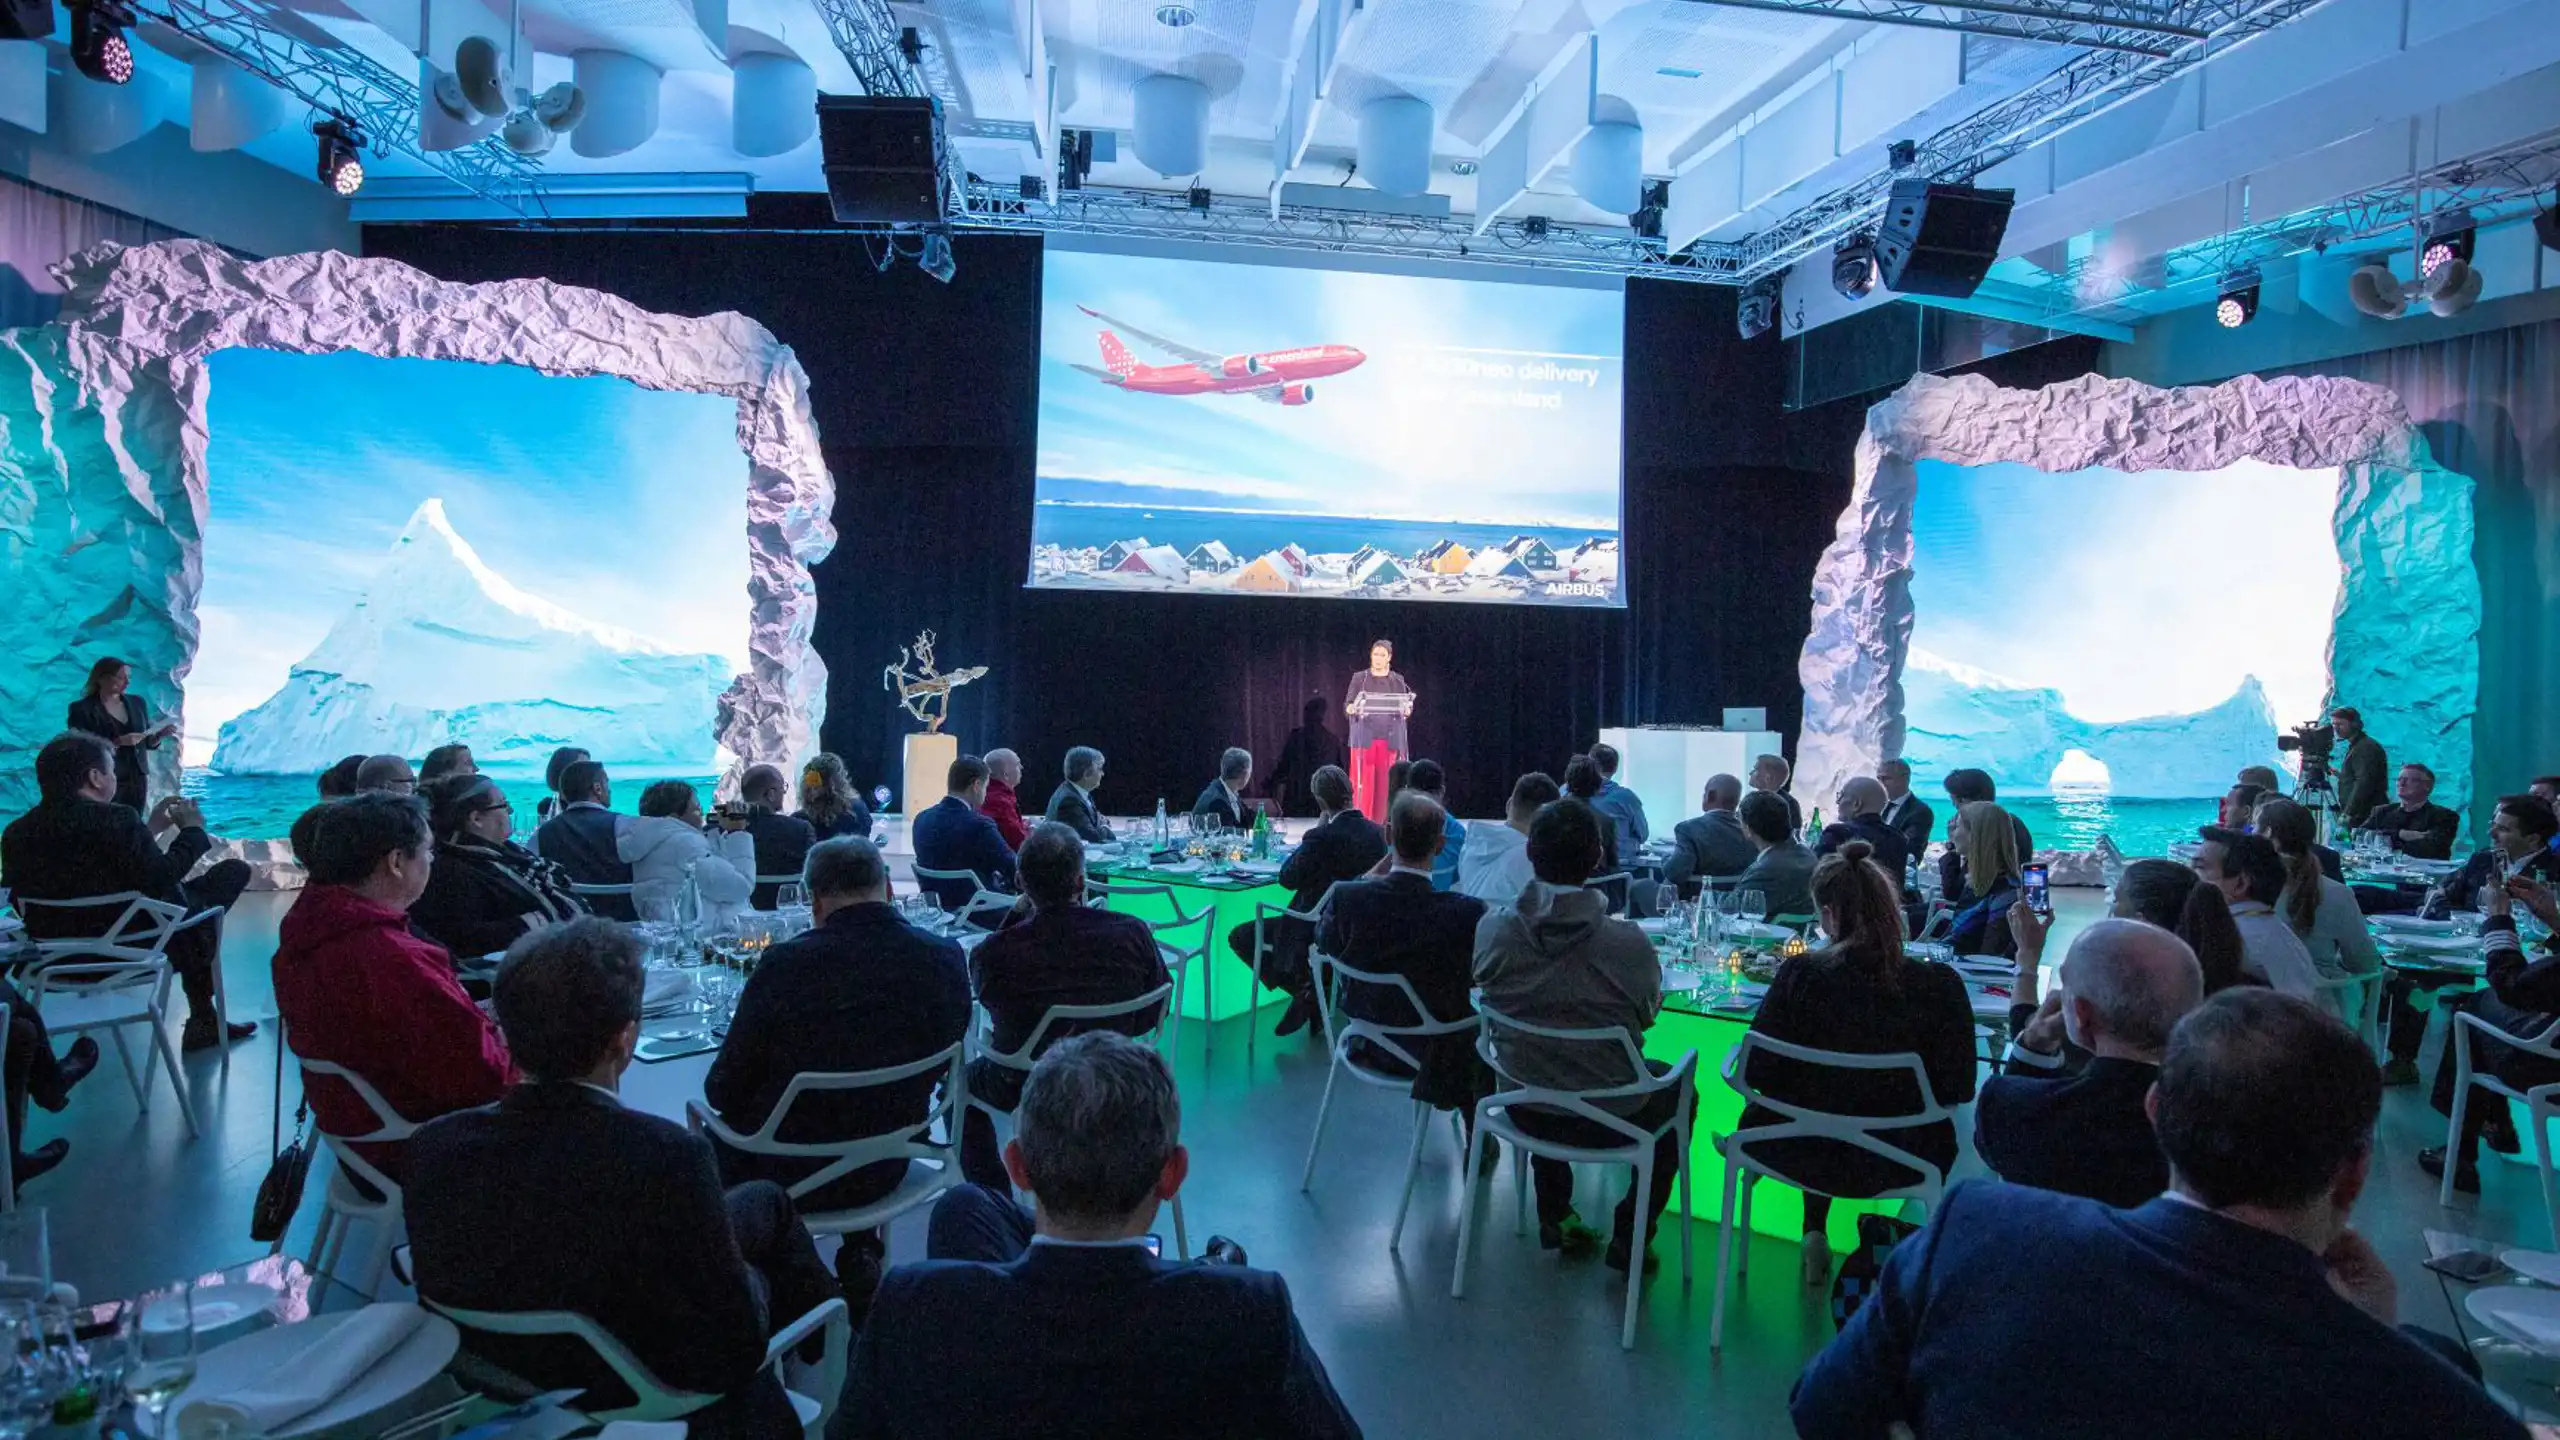 The delivery of Tuukkaq was celebrated at an event arranged by Airbus